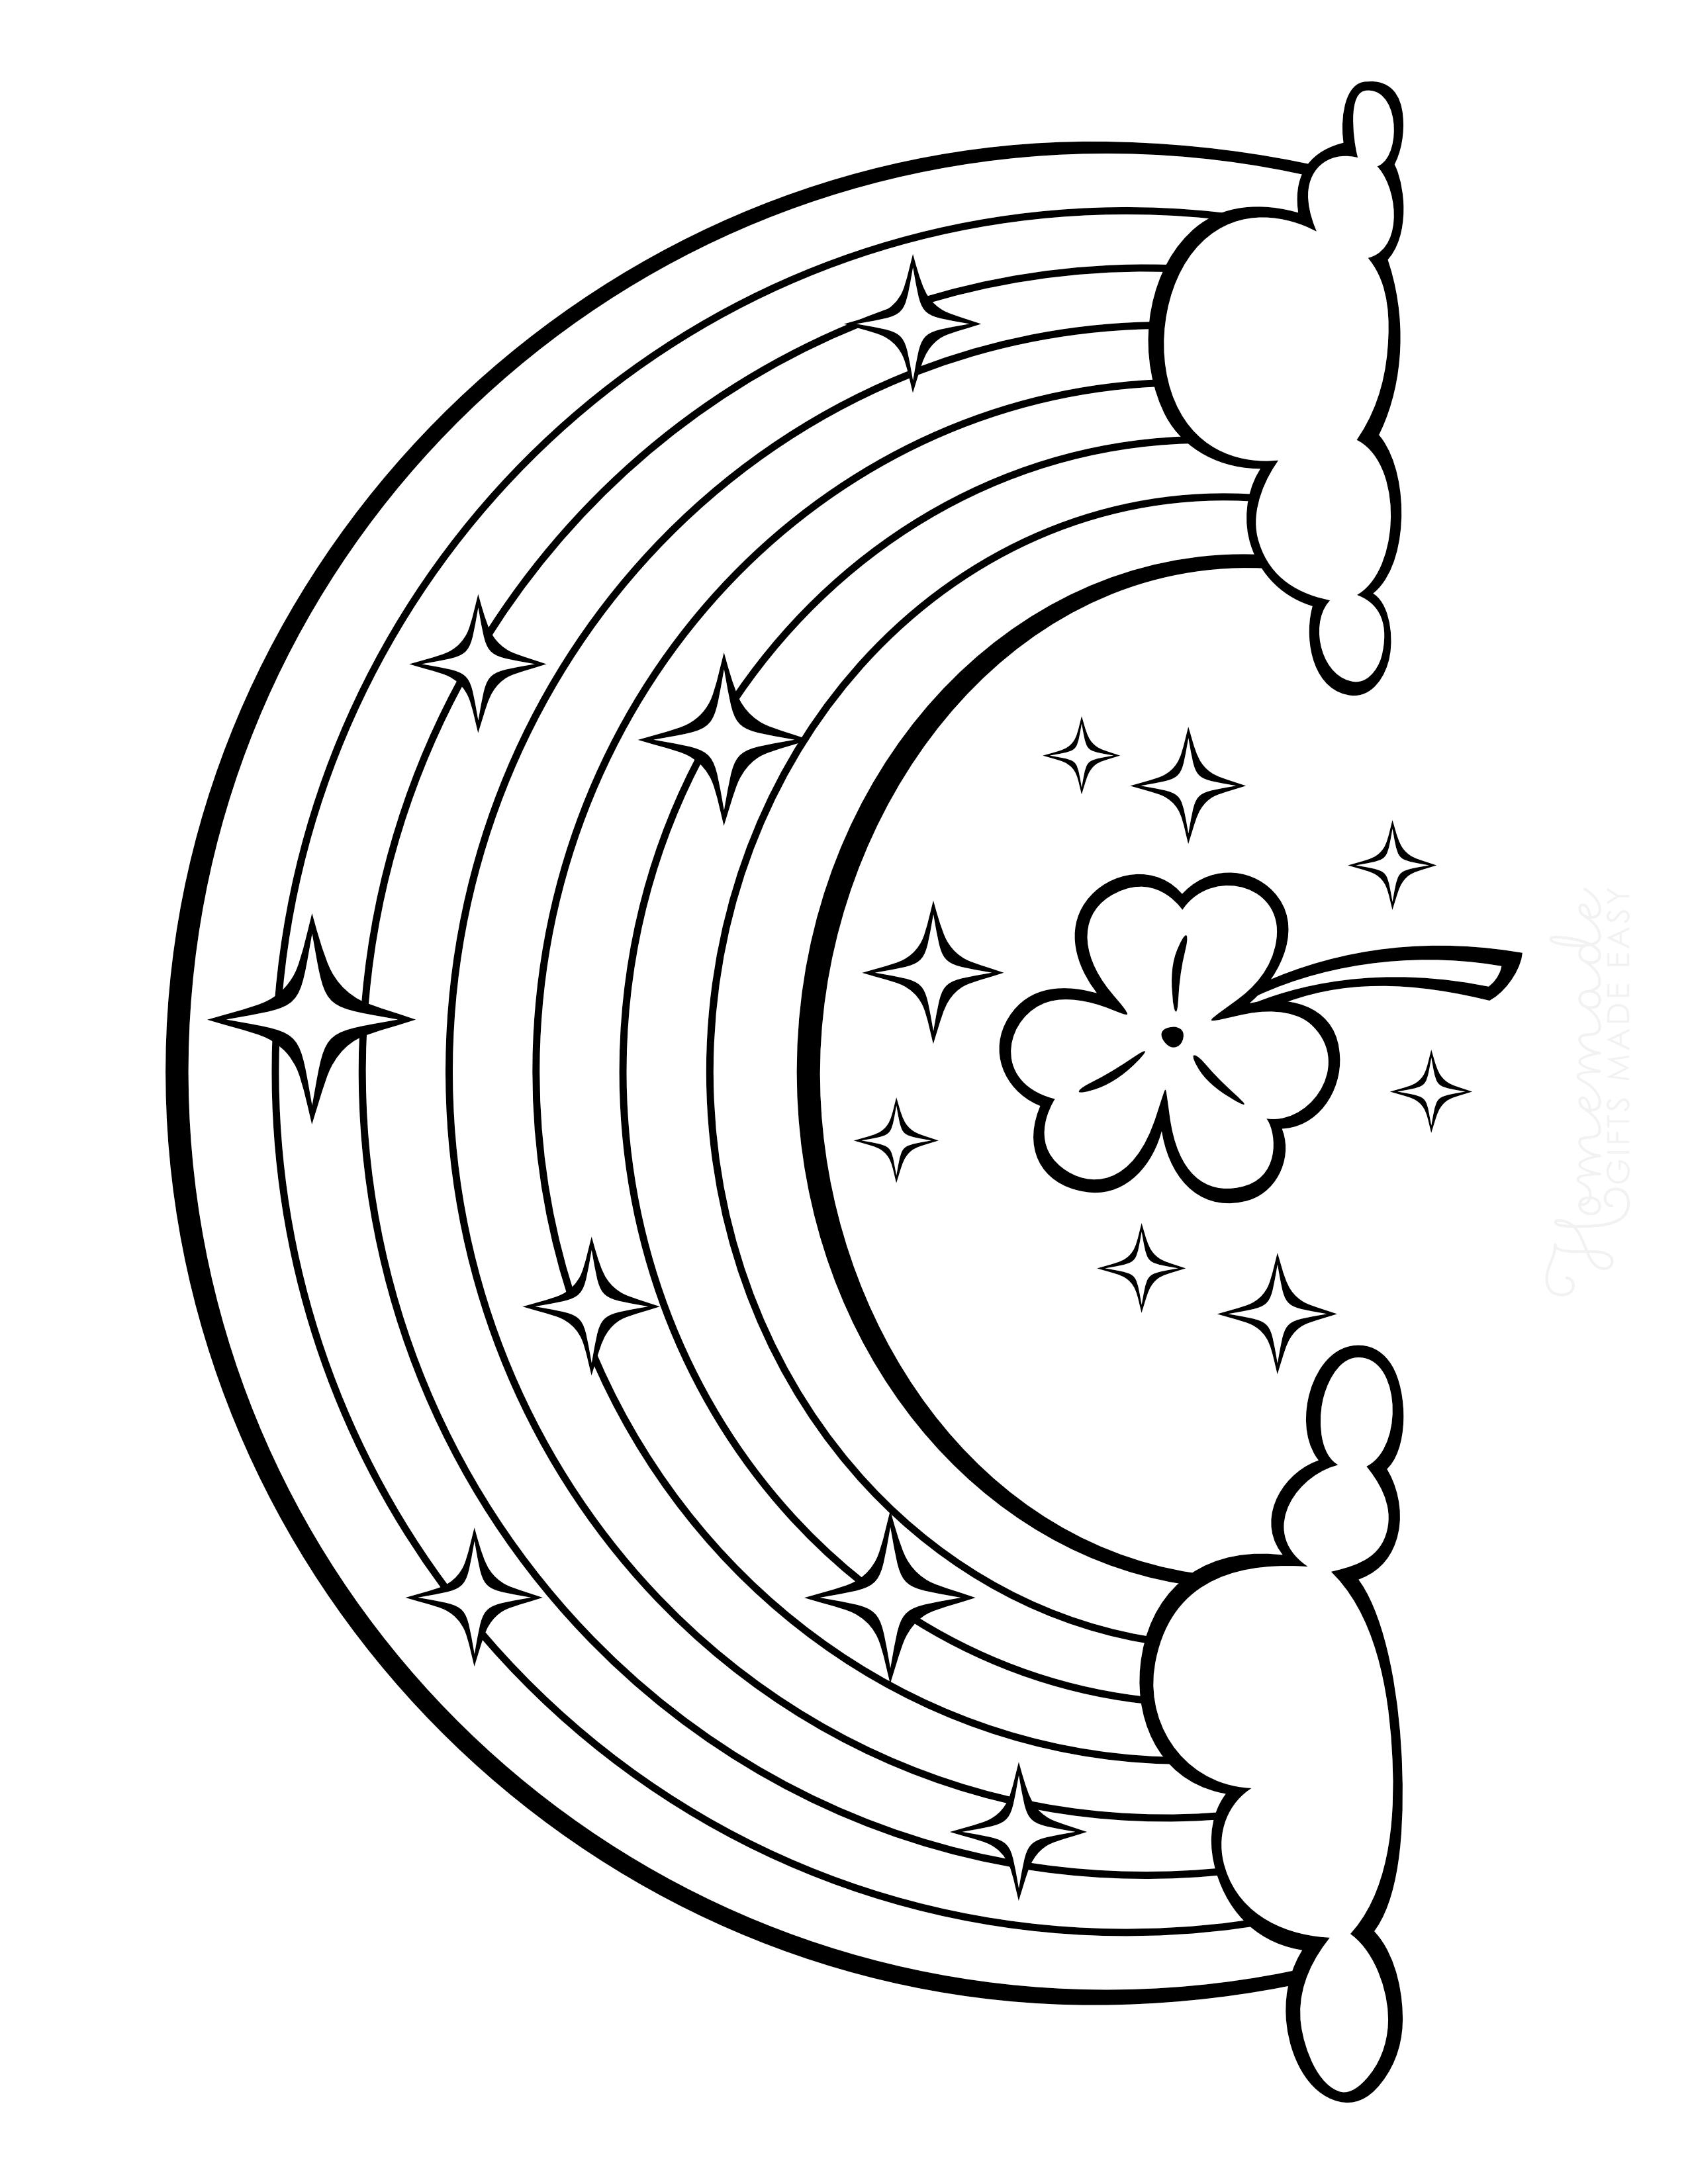 Rainbow Shamrock Coloring Pages